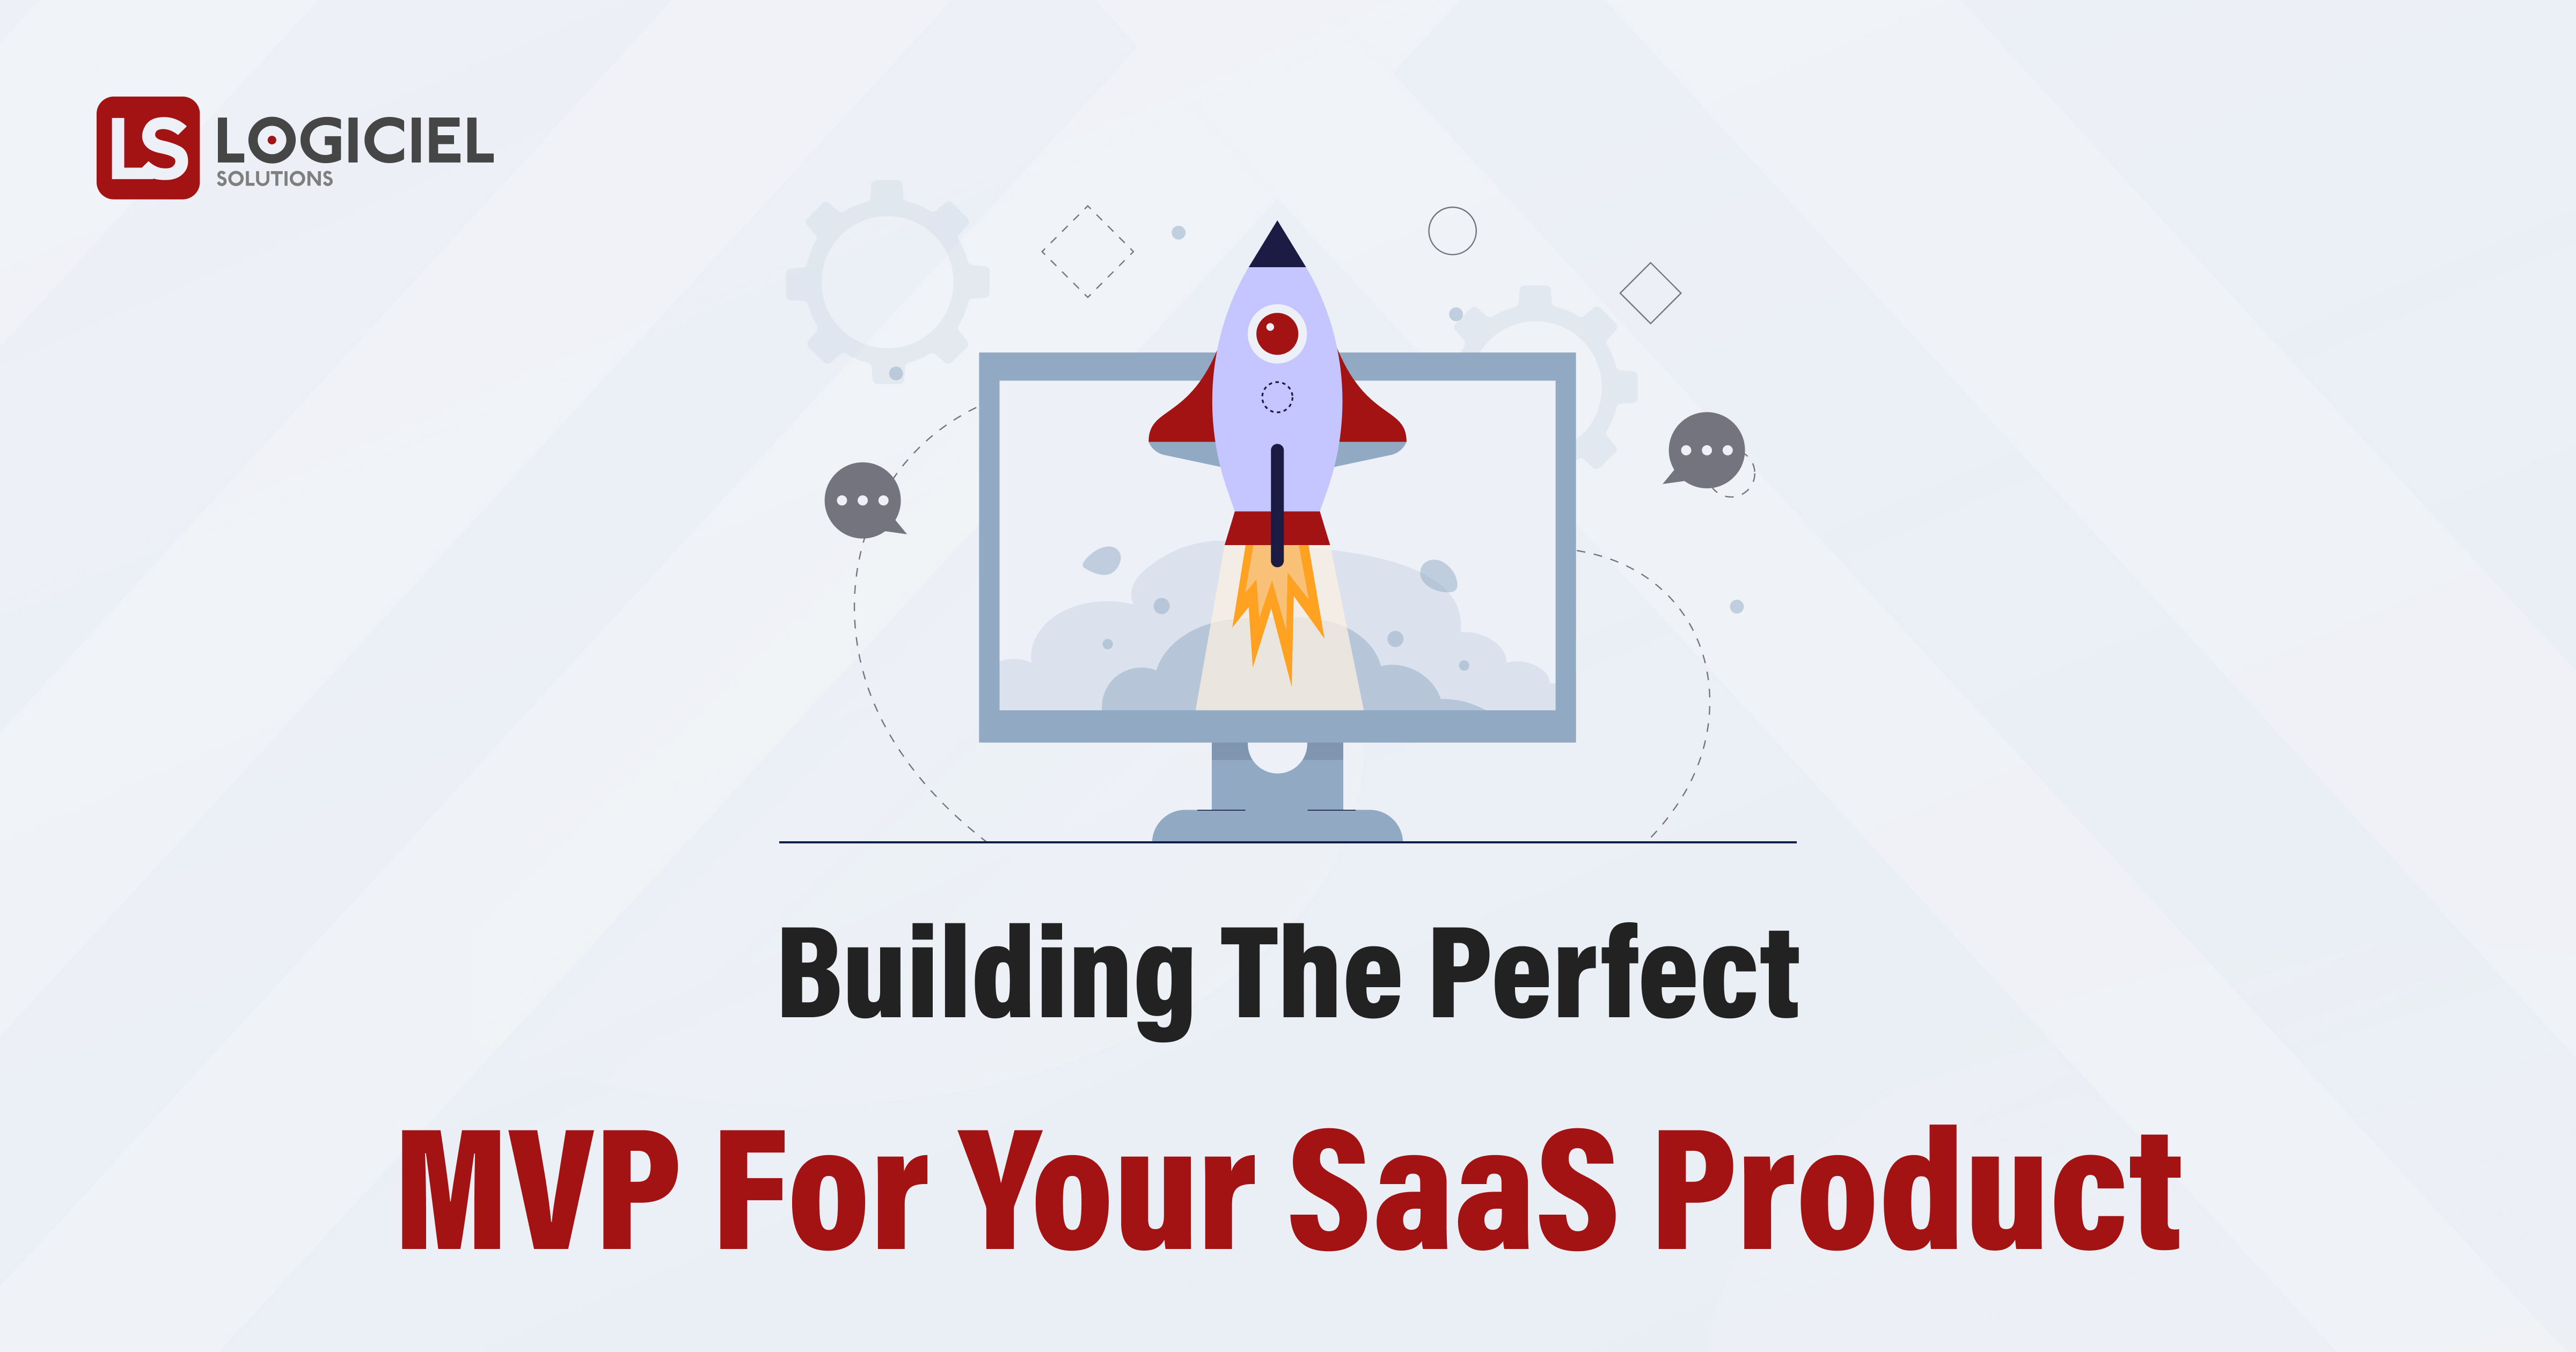 Building the perfect MVP for your SaaS product